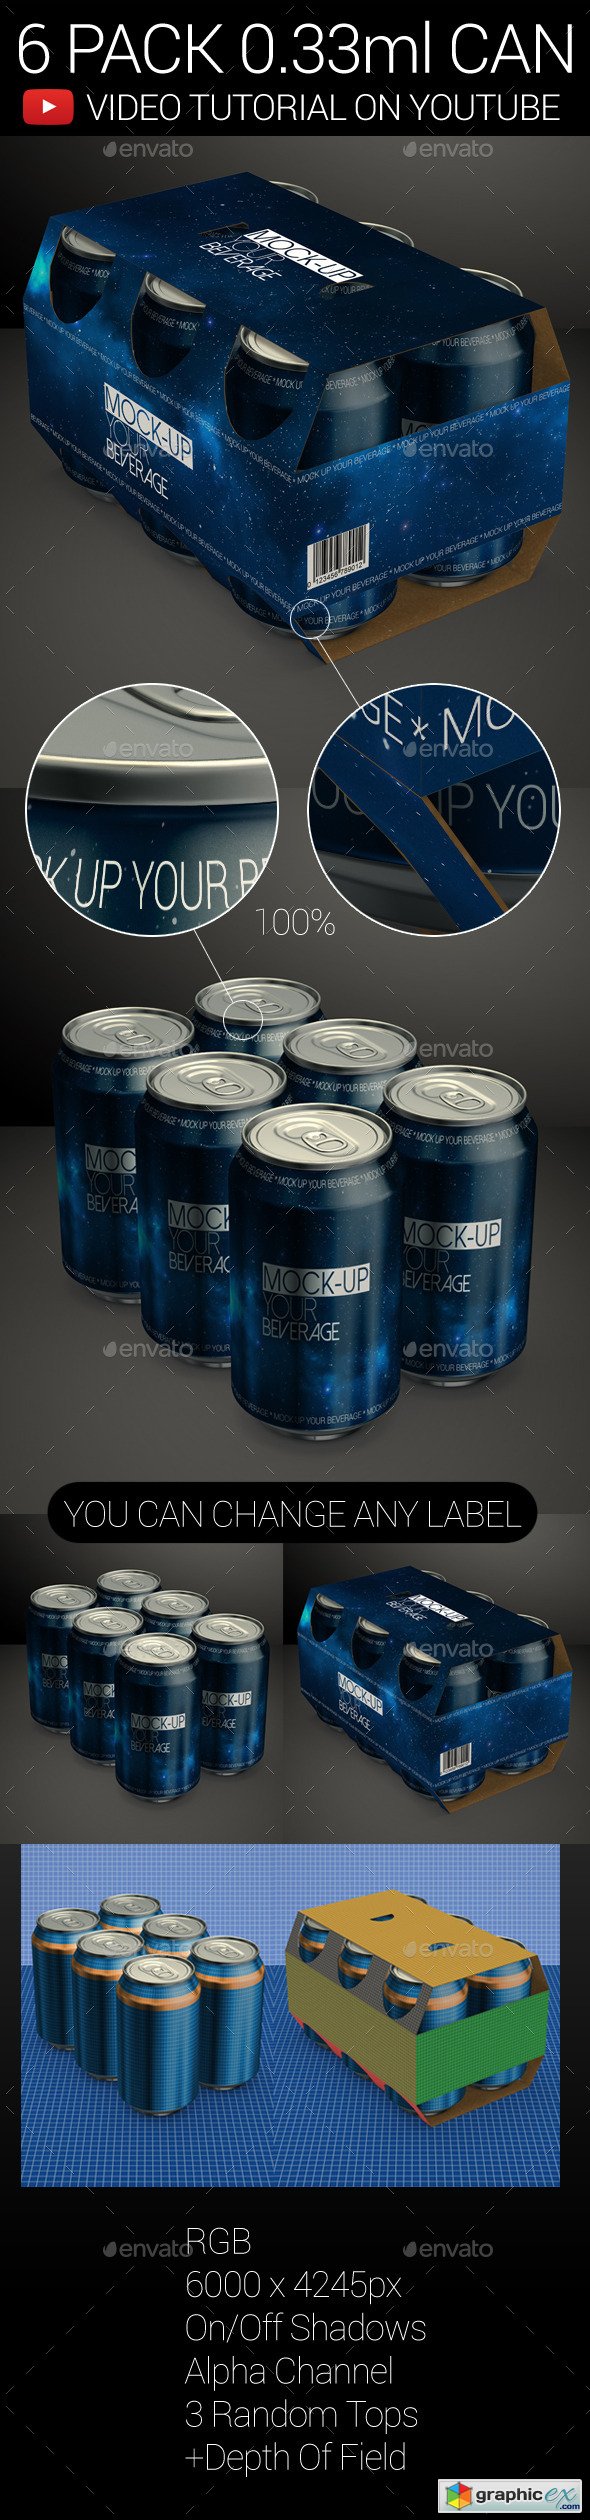 6 Pack 0.33ml Can 01